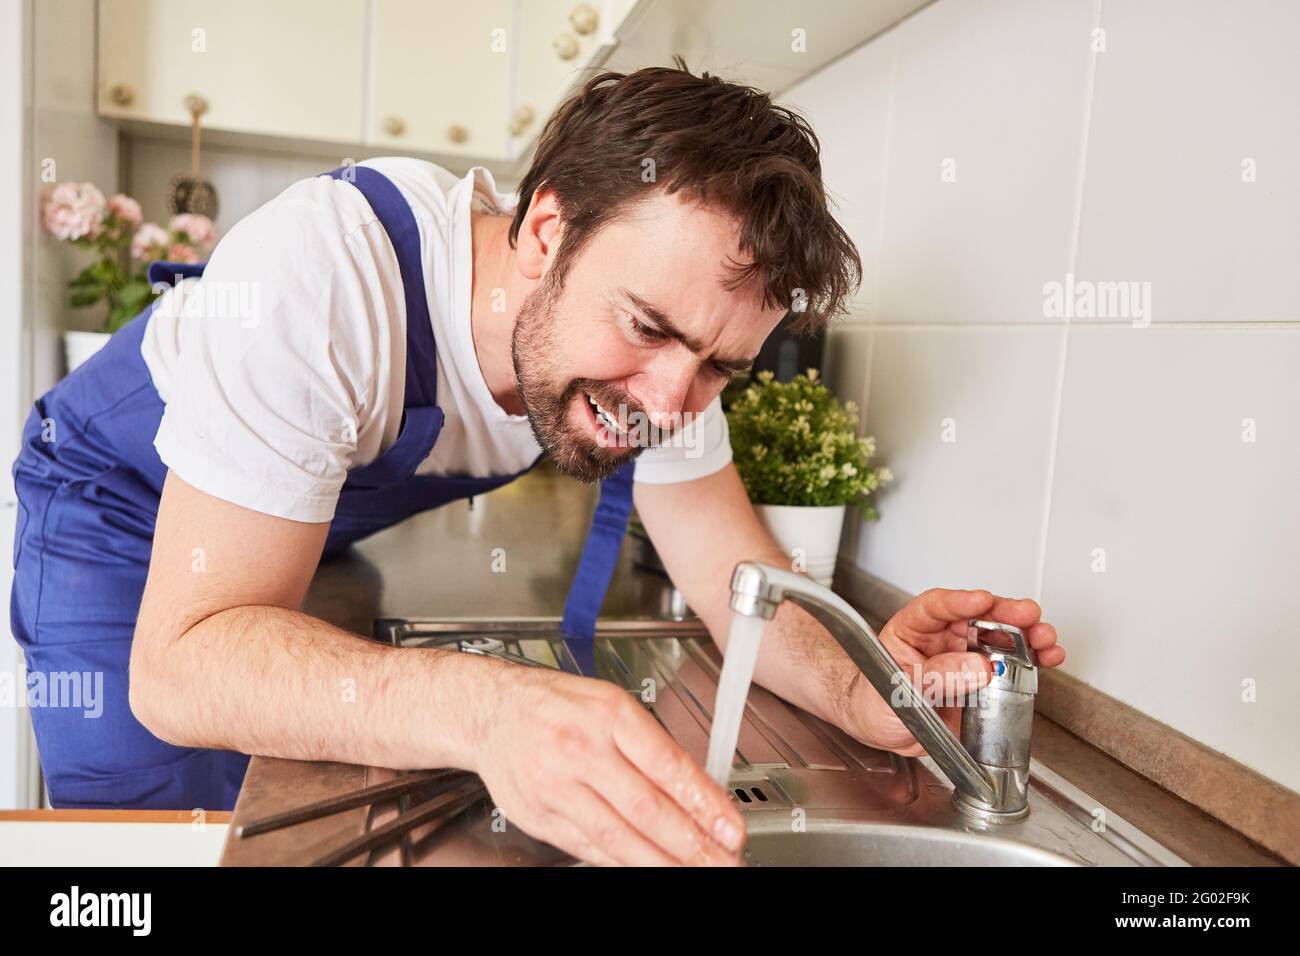 Plumber or do-it-yourselfer controls water flow at the kitchen sink tap Stock Photo